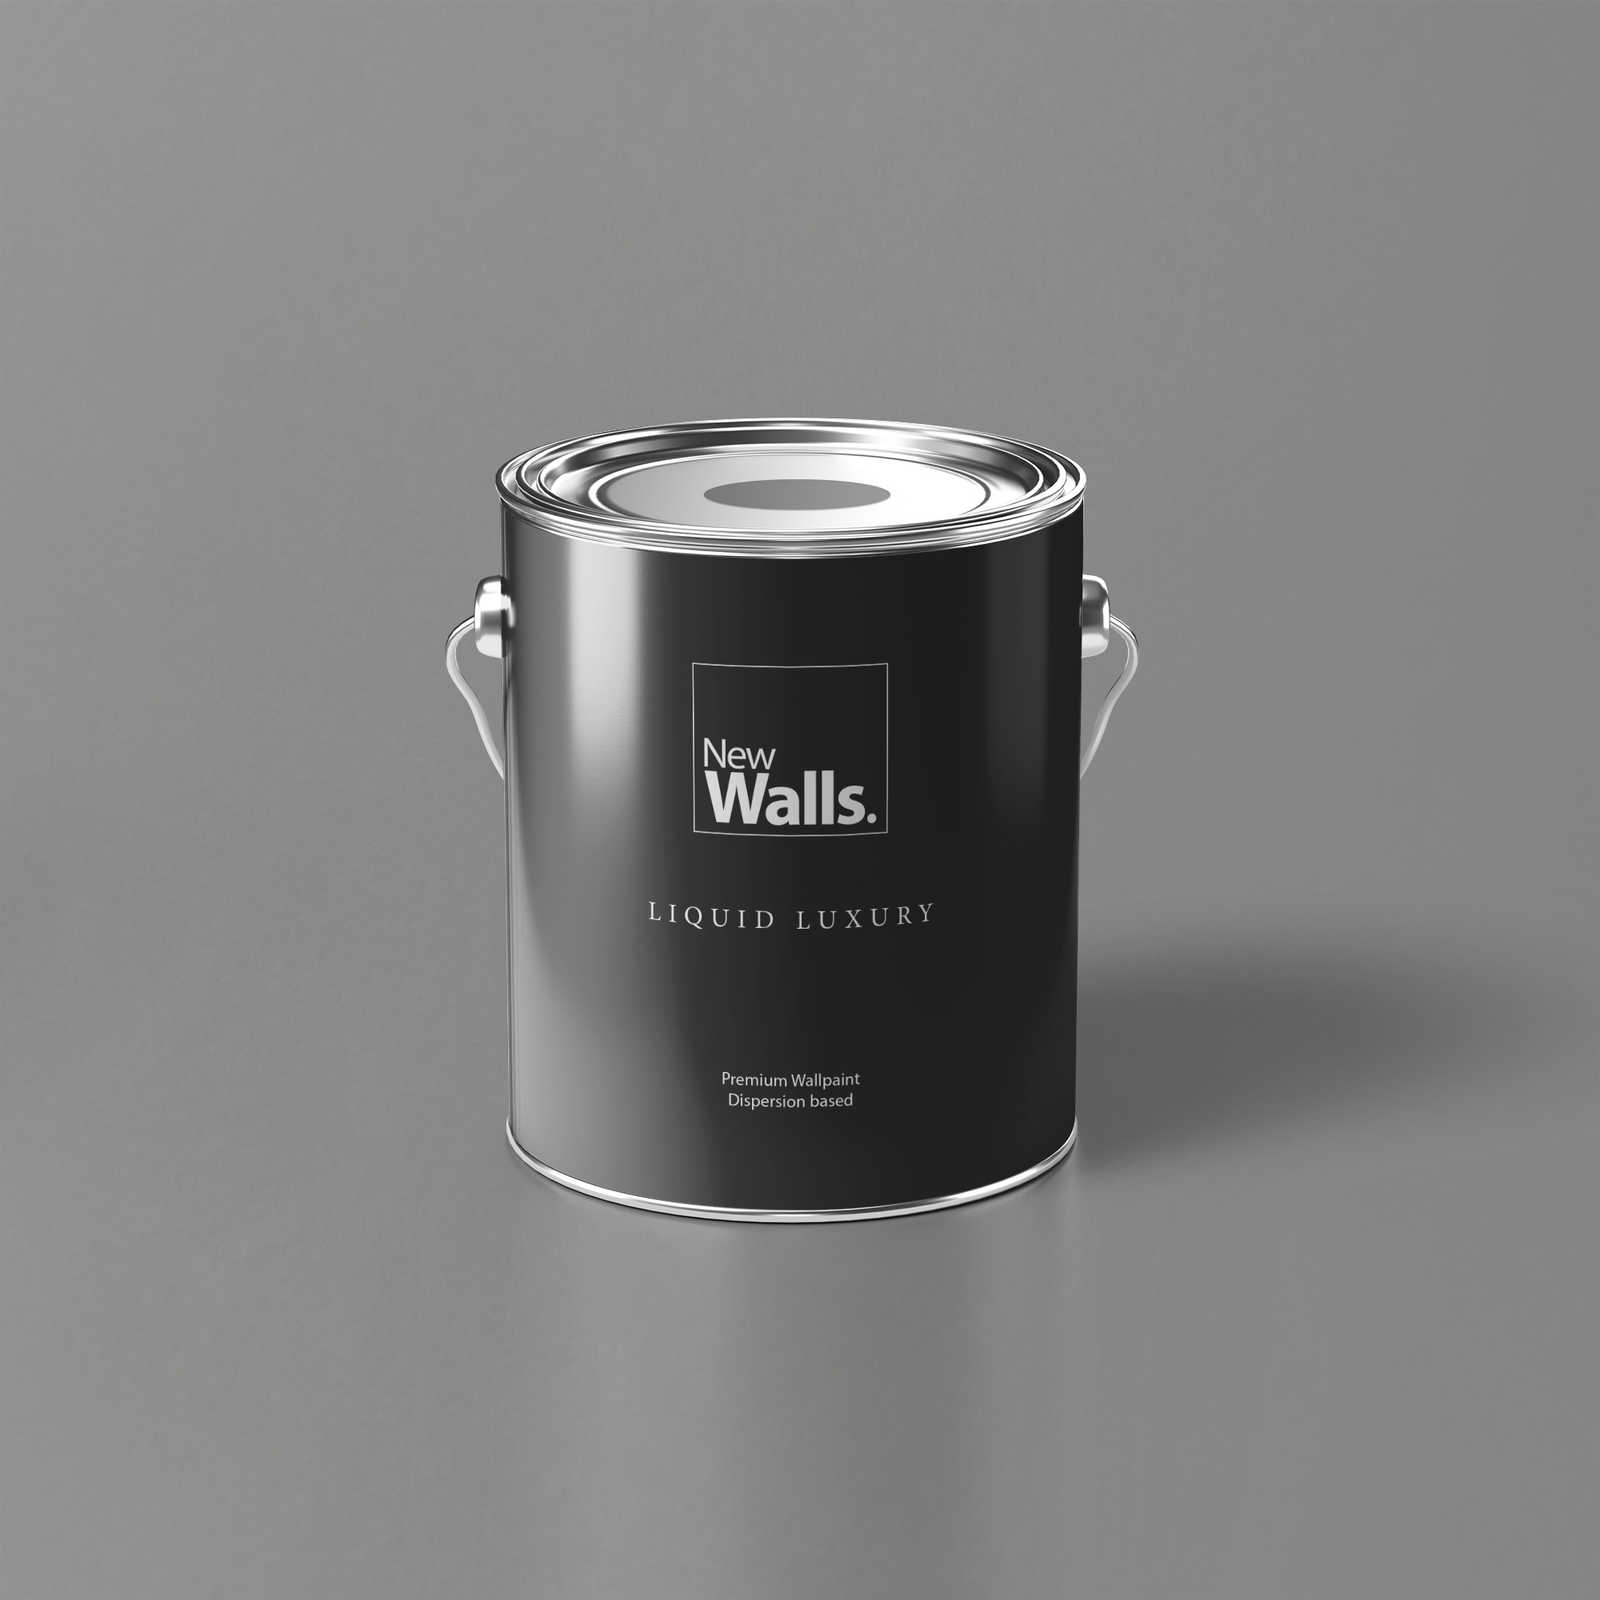 Premium Wall Paint neutral stone grey »Industrial Grey« NW102 – 5 litre
